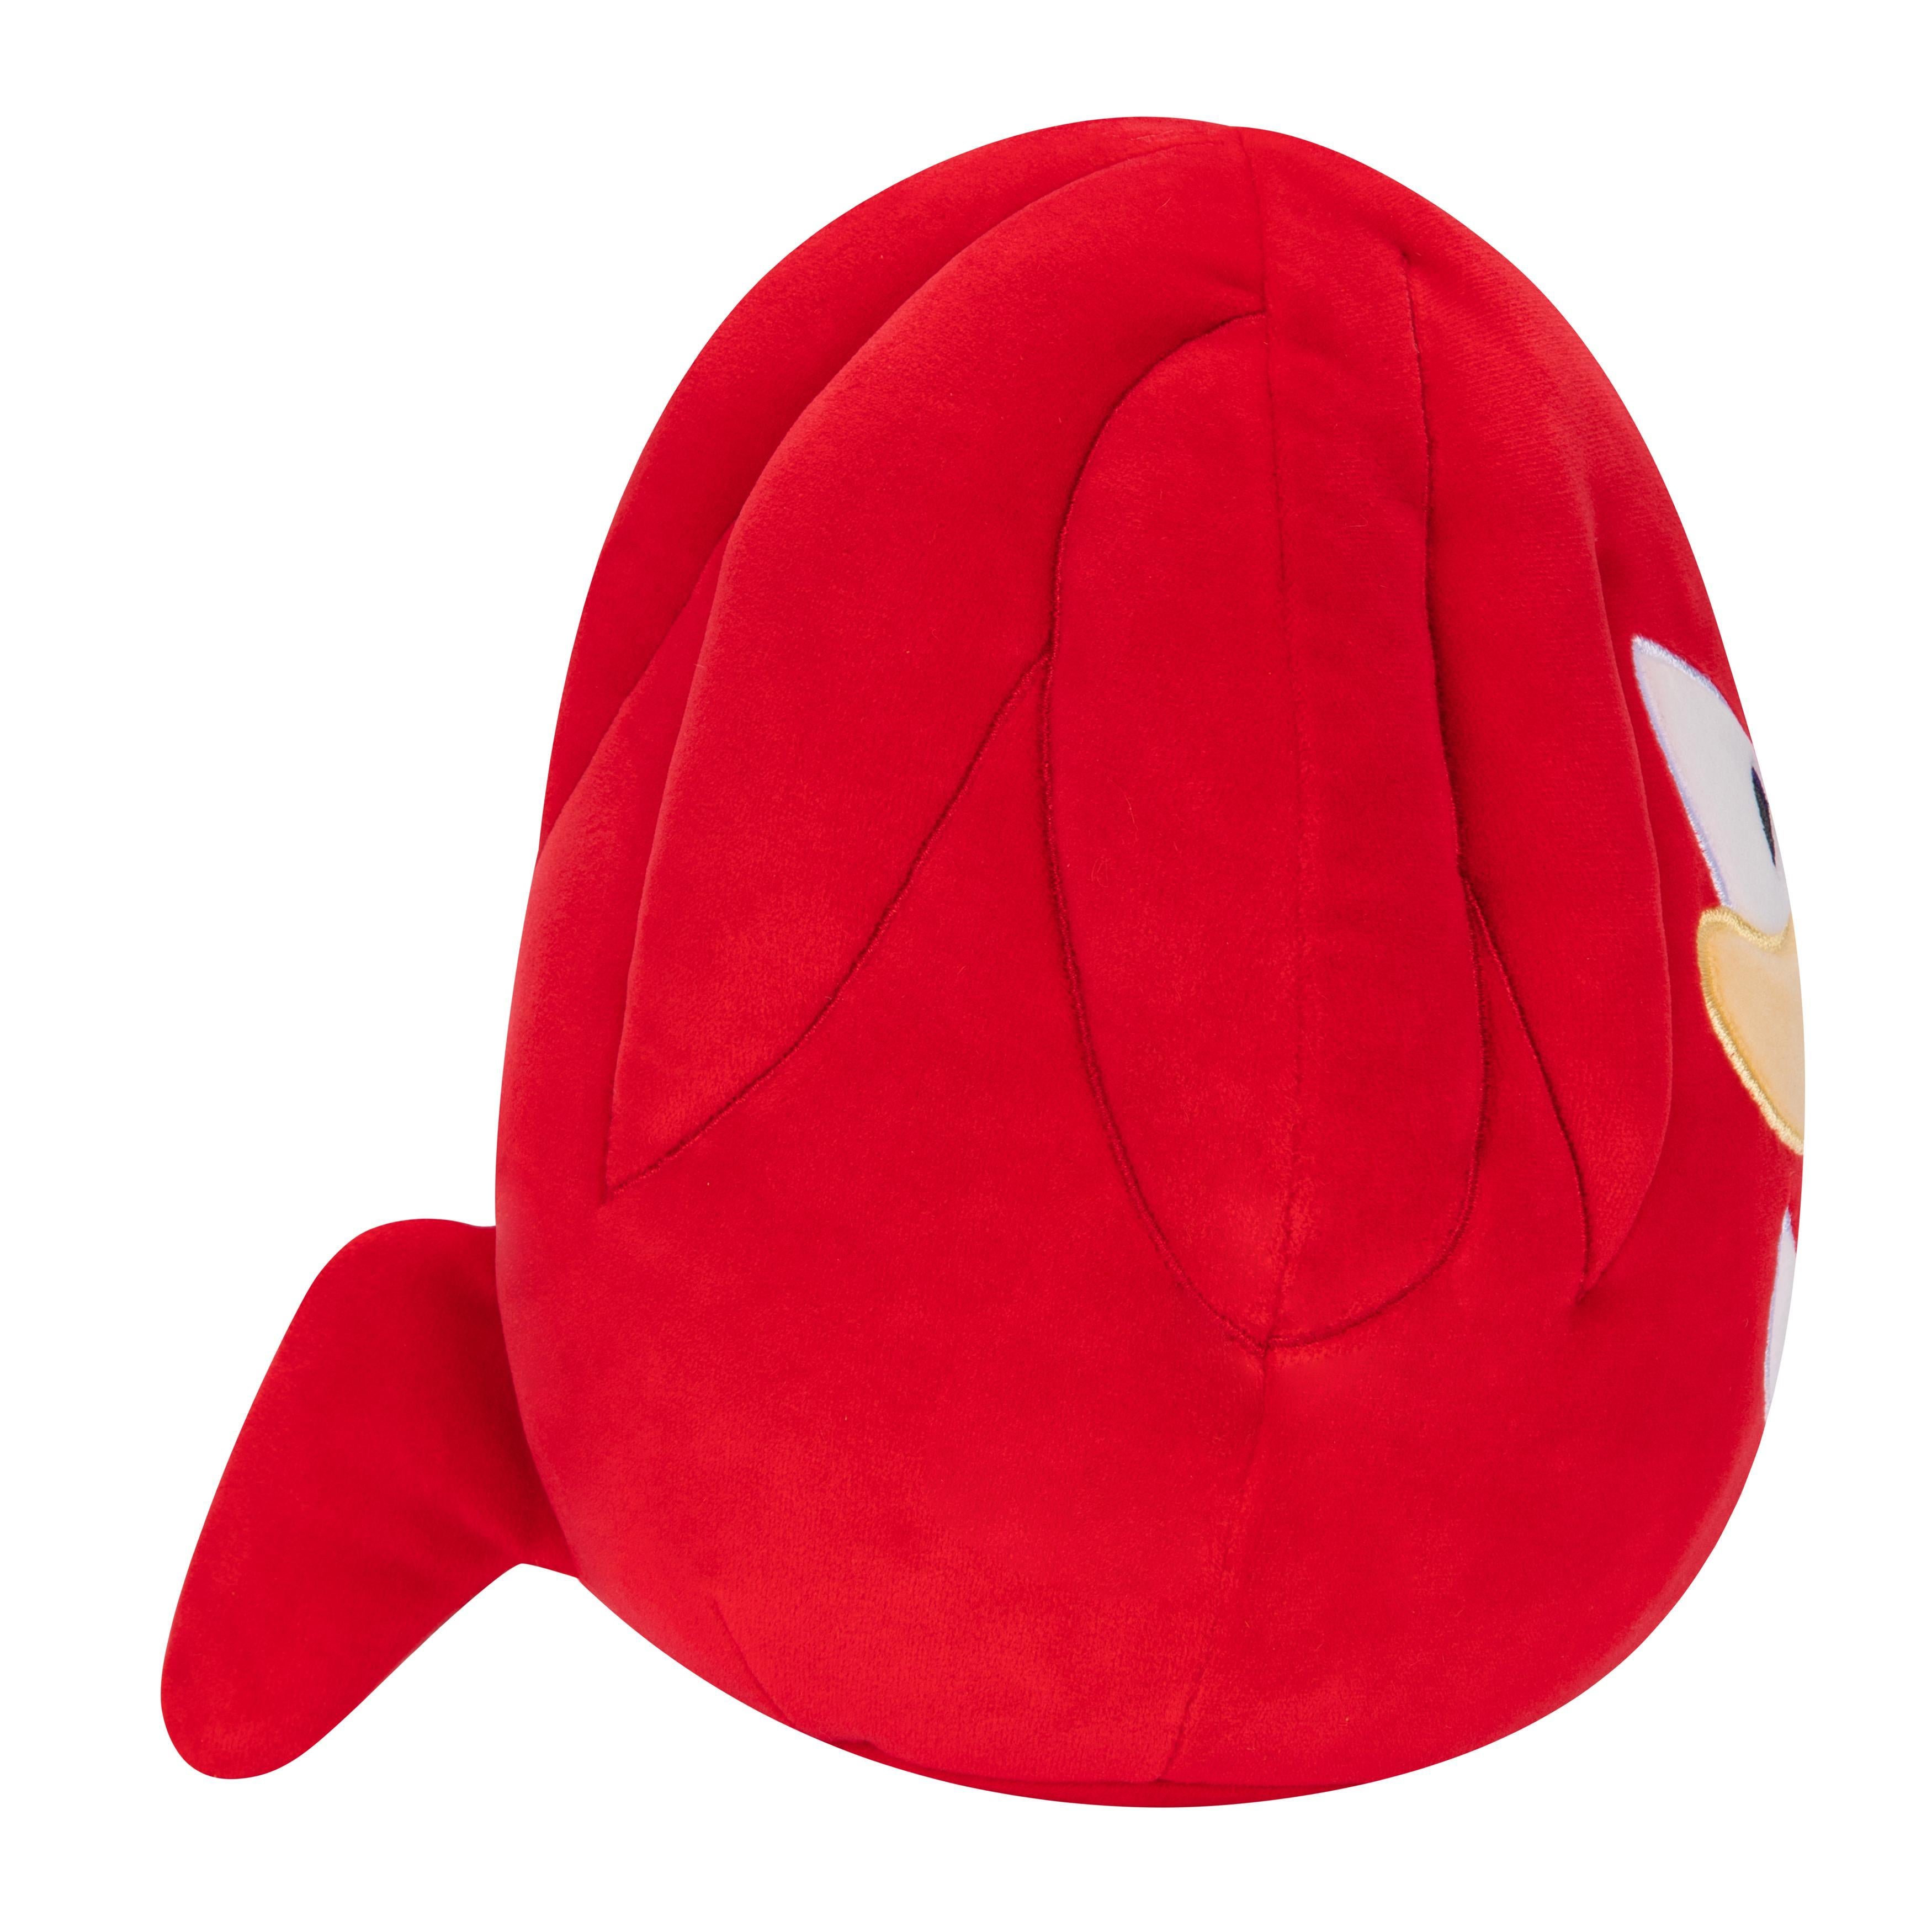 Squishmallows - Sonic The Hedgehog - Knuckles 20 cm